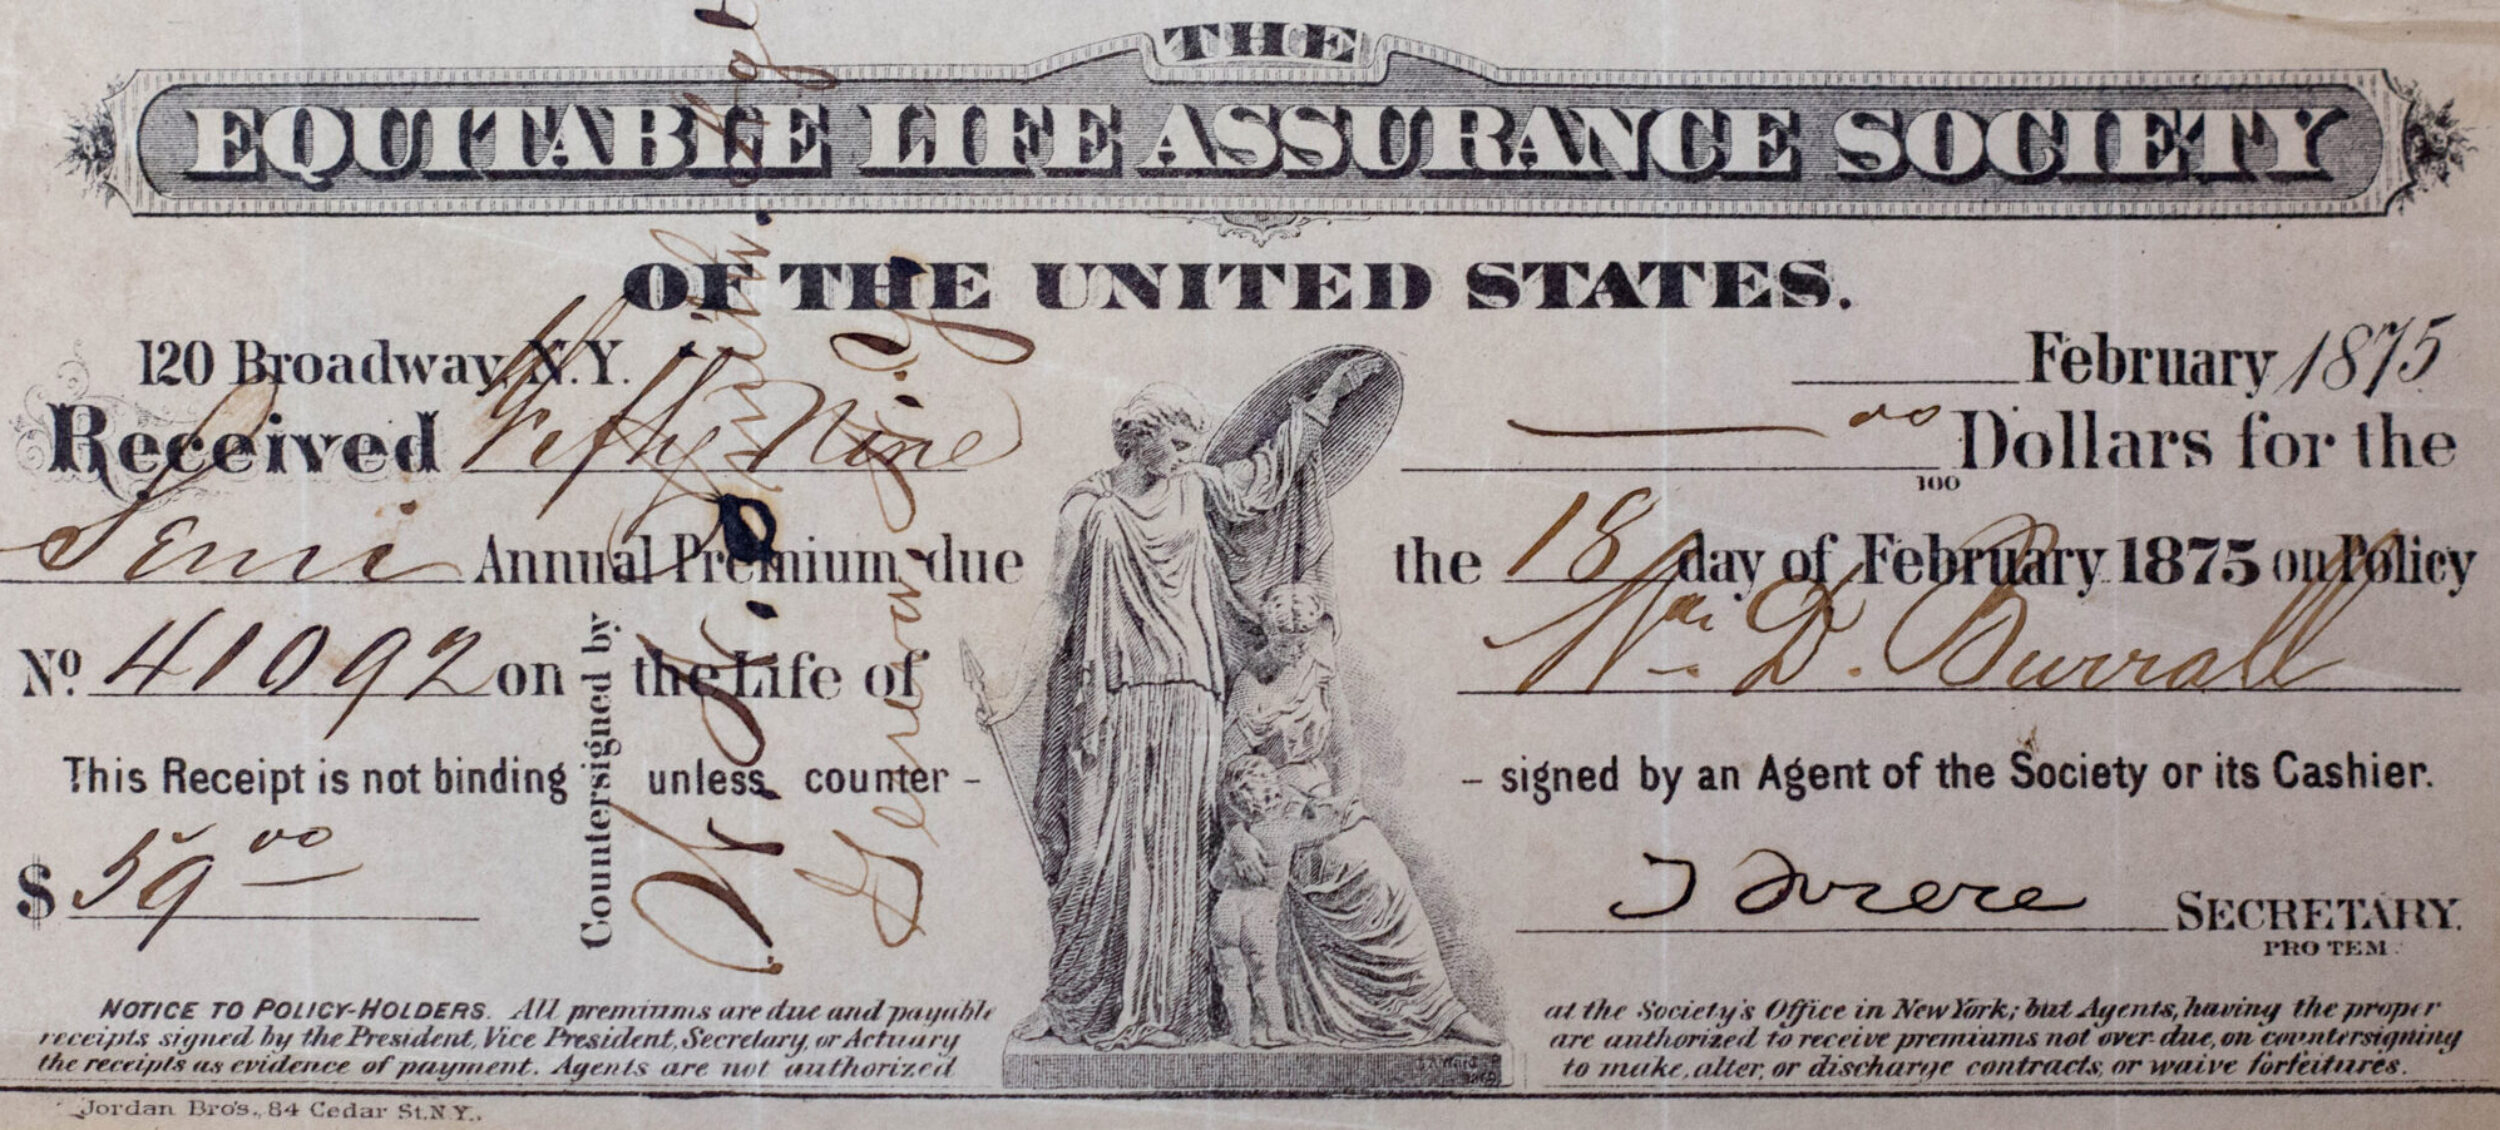 C.S. Burrall and Son Equitable Life Assurance Society Certificate from 1875